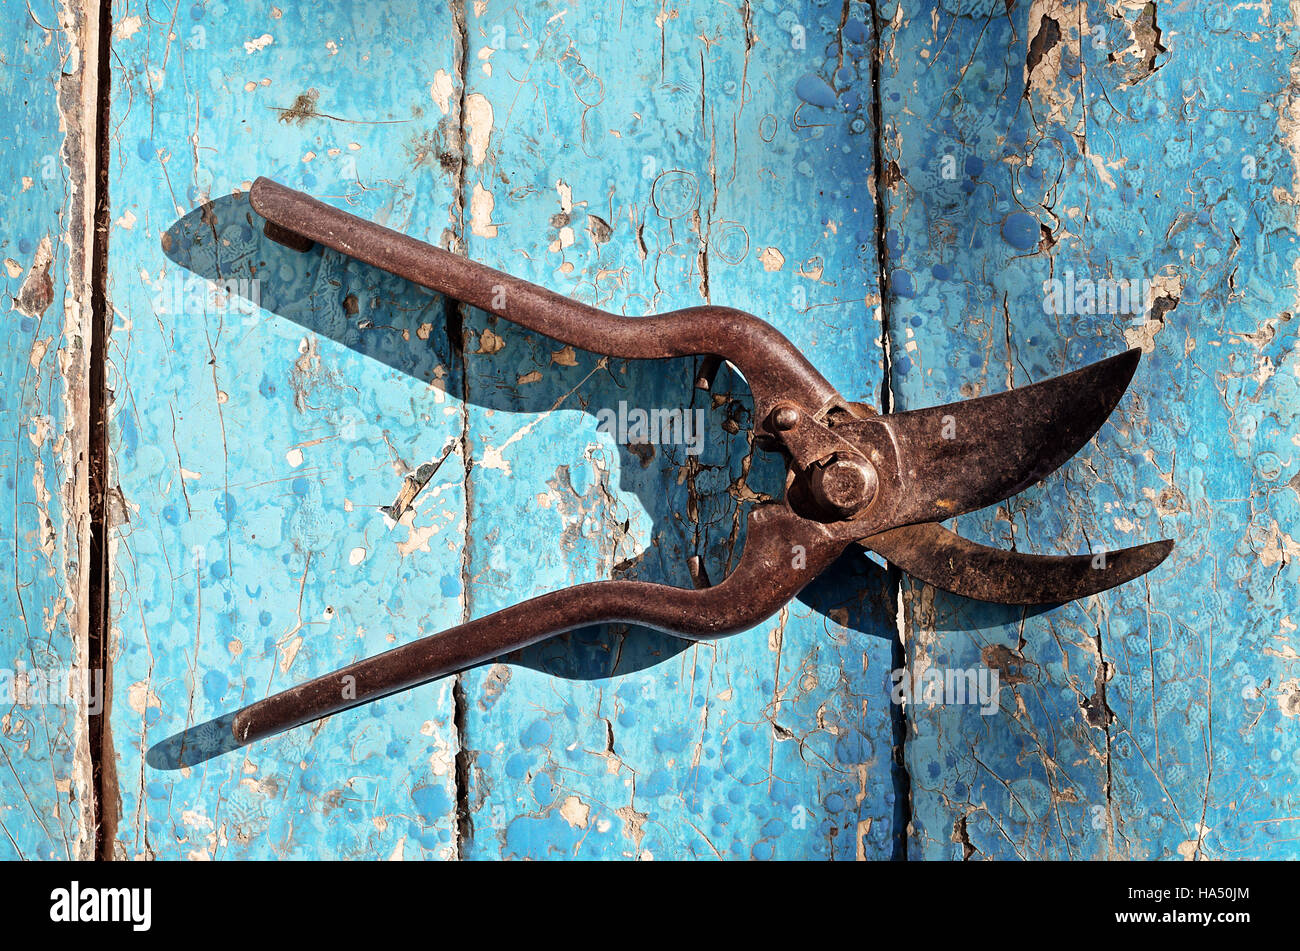 Gardening pruning shears for cutting branches on vintage wooden board top view agriculture concept, rusty garden tools, secateurs. Stock Photo